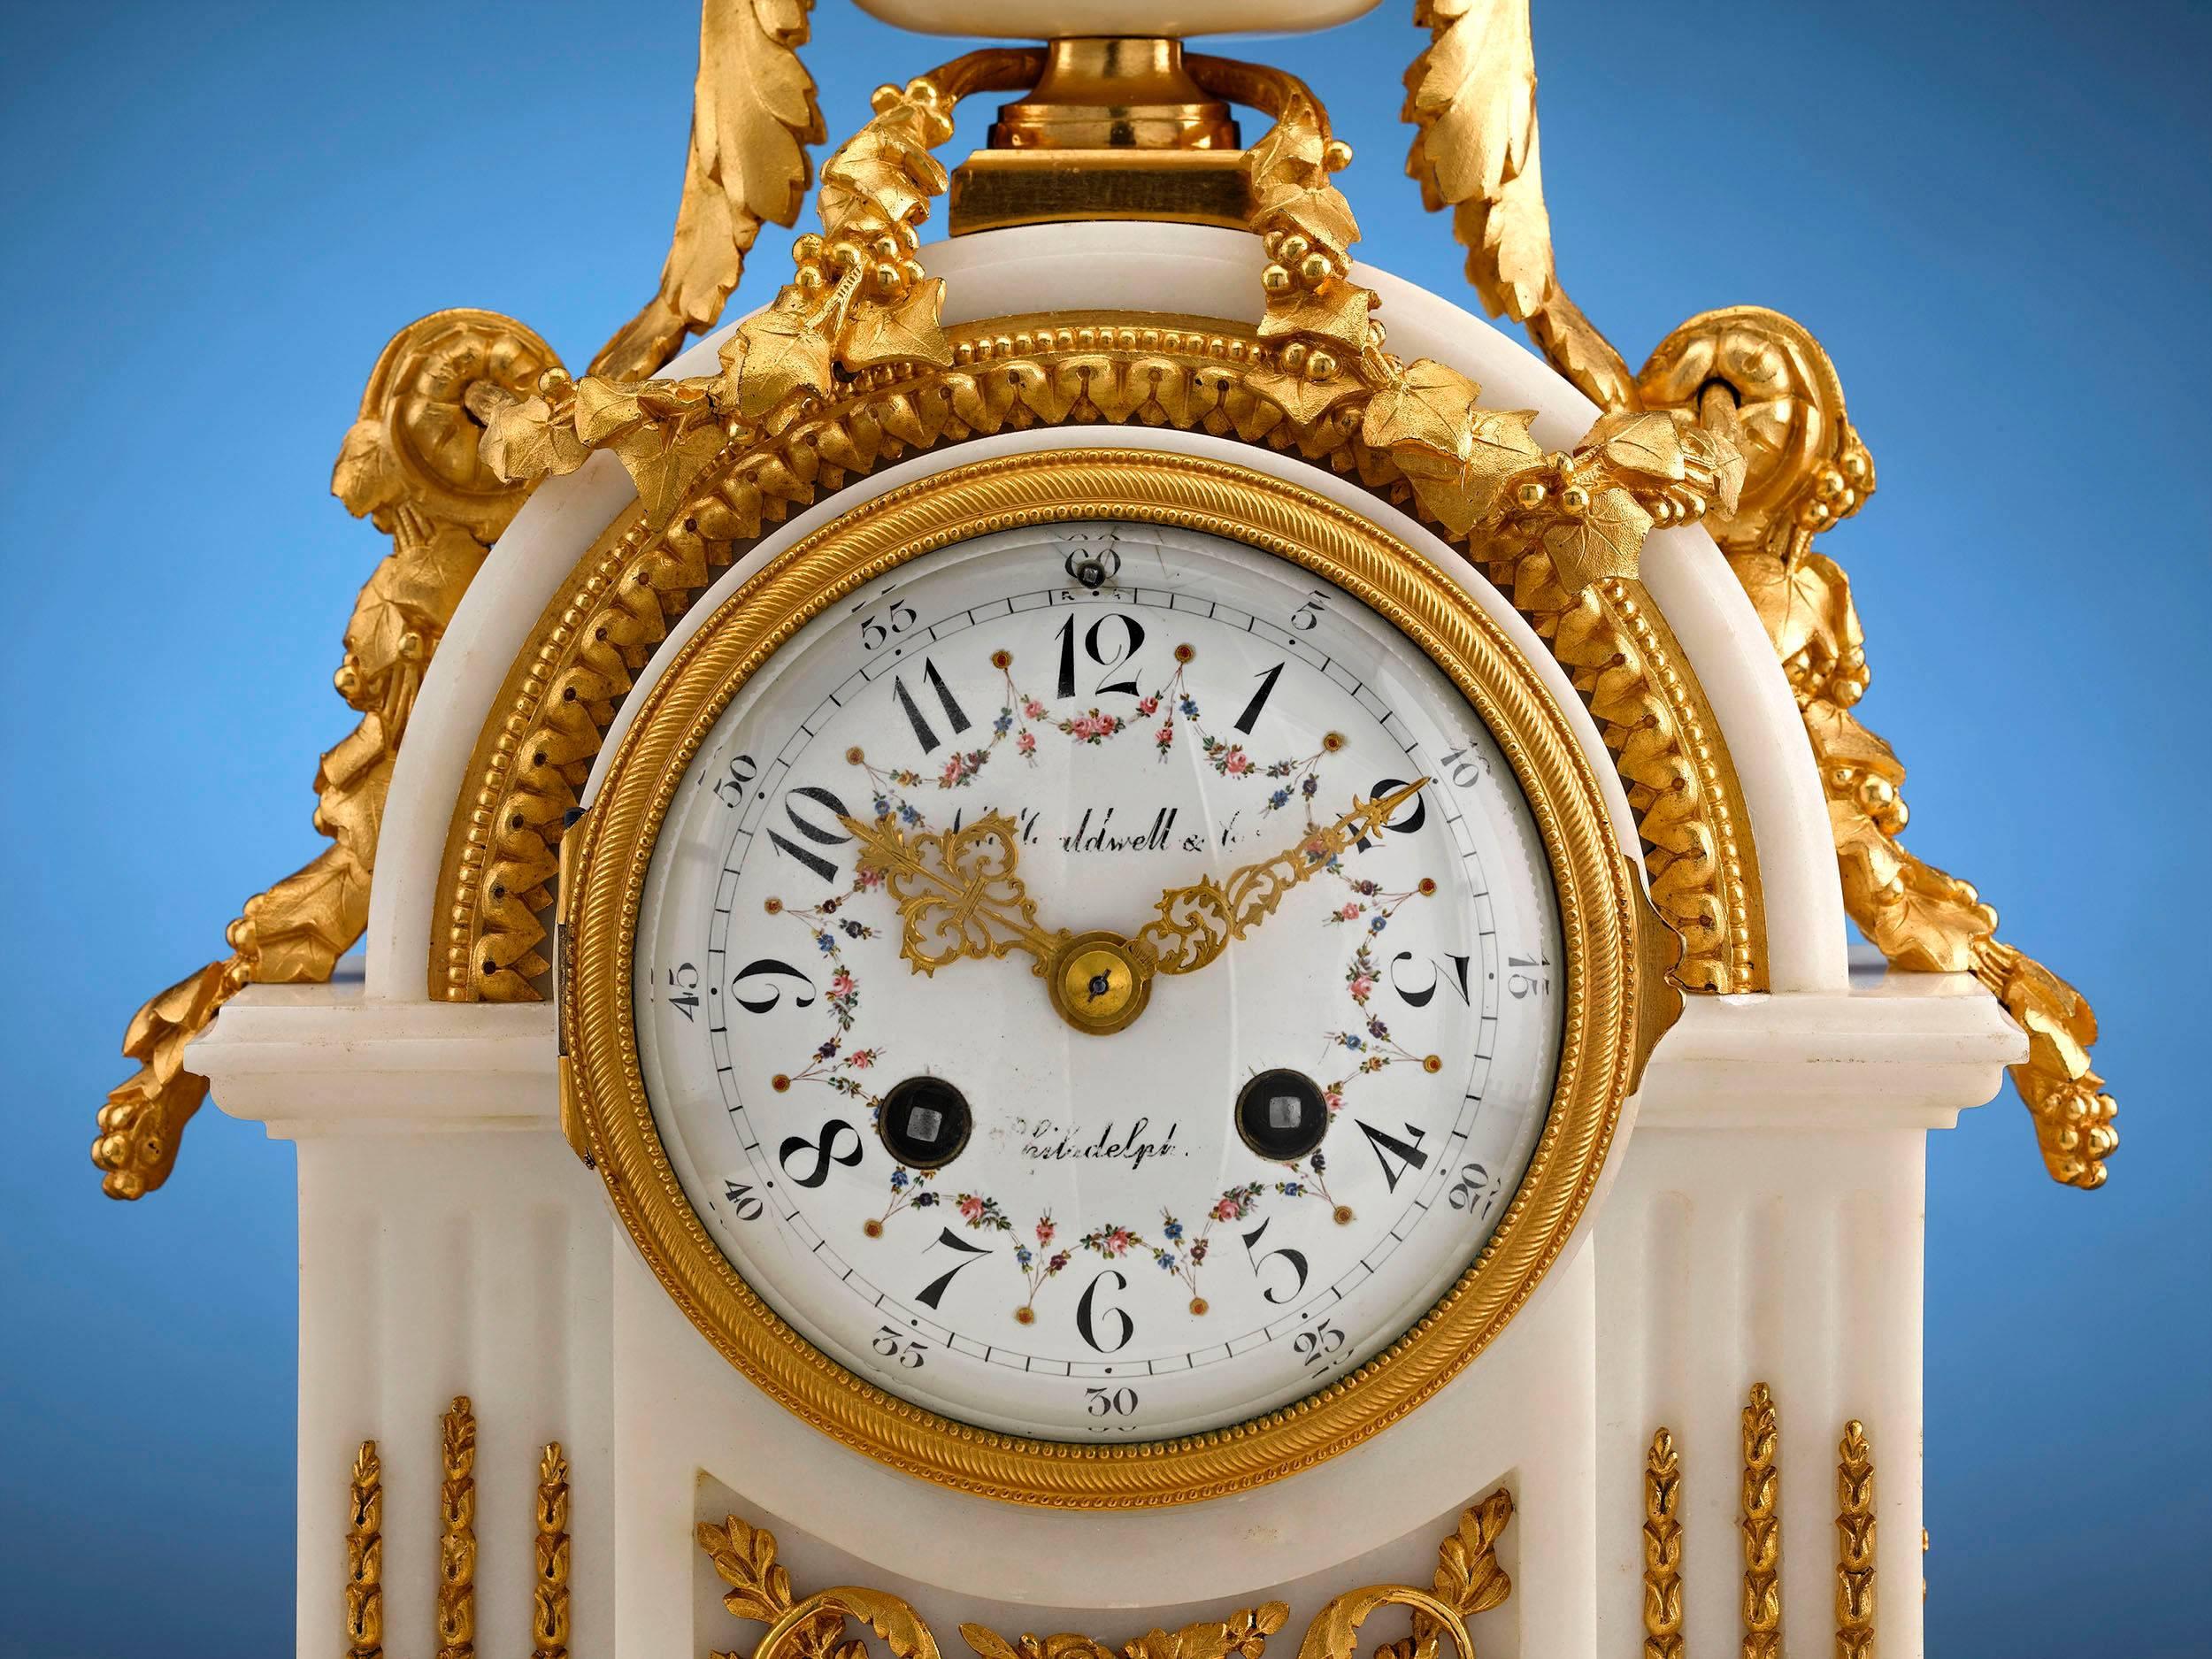 This stunning mantel clock by J. E. Caldwell & Co. of Philadelphia exudes tasteful elegance. Crafted of luxurious marble in the French Louis XVI-style, this stunning timepiece boasts cast doré bronze adornments, from the harvest finial and